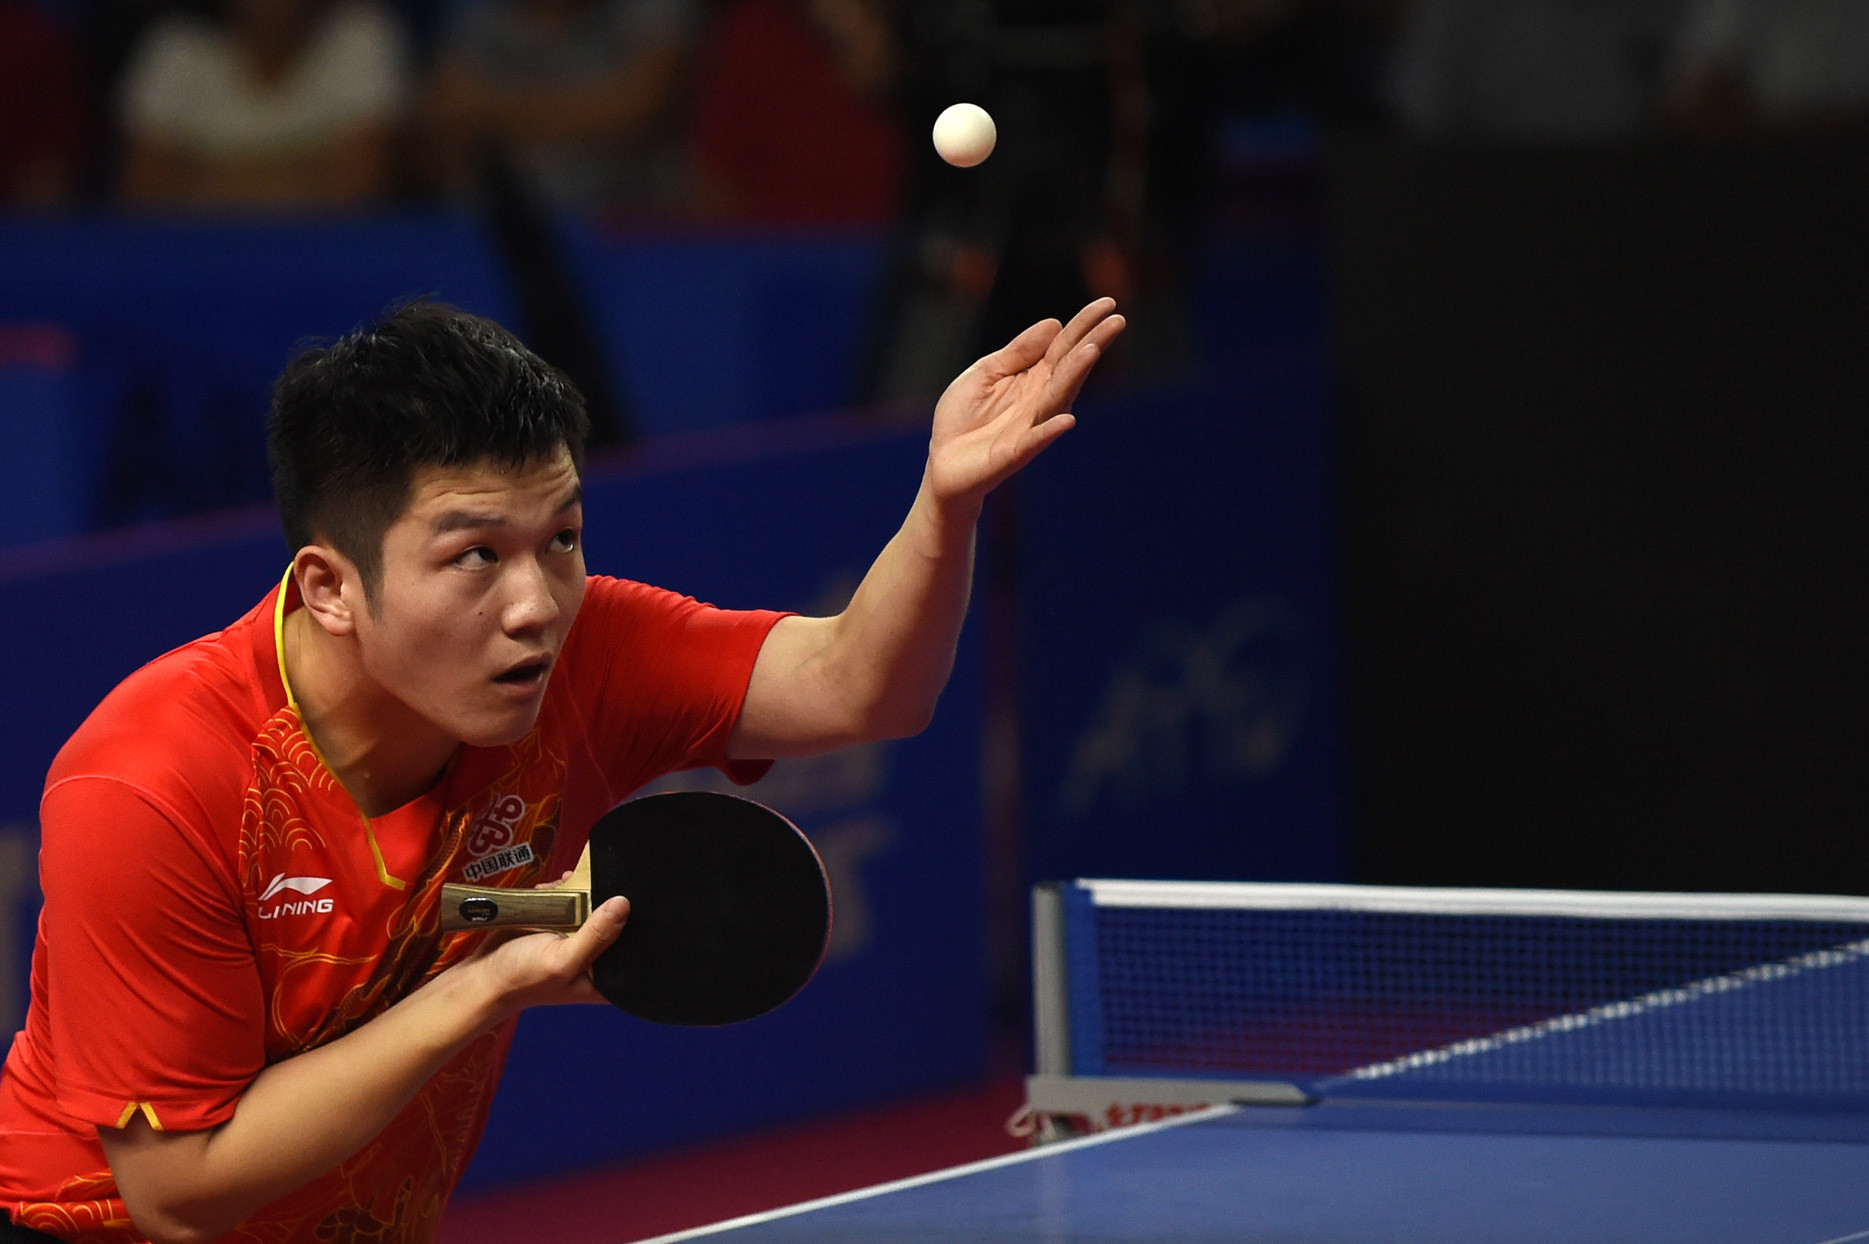 Top seeds Fan and Chen safely through to quarter-finals at ITTF Hungarian Open 